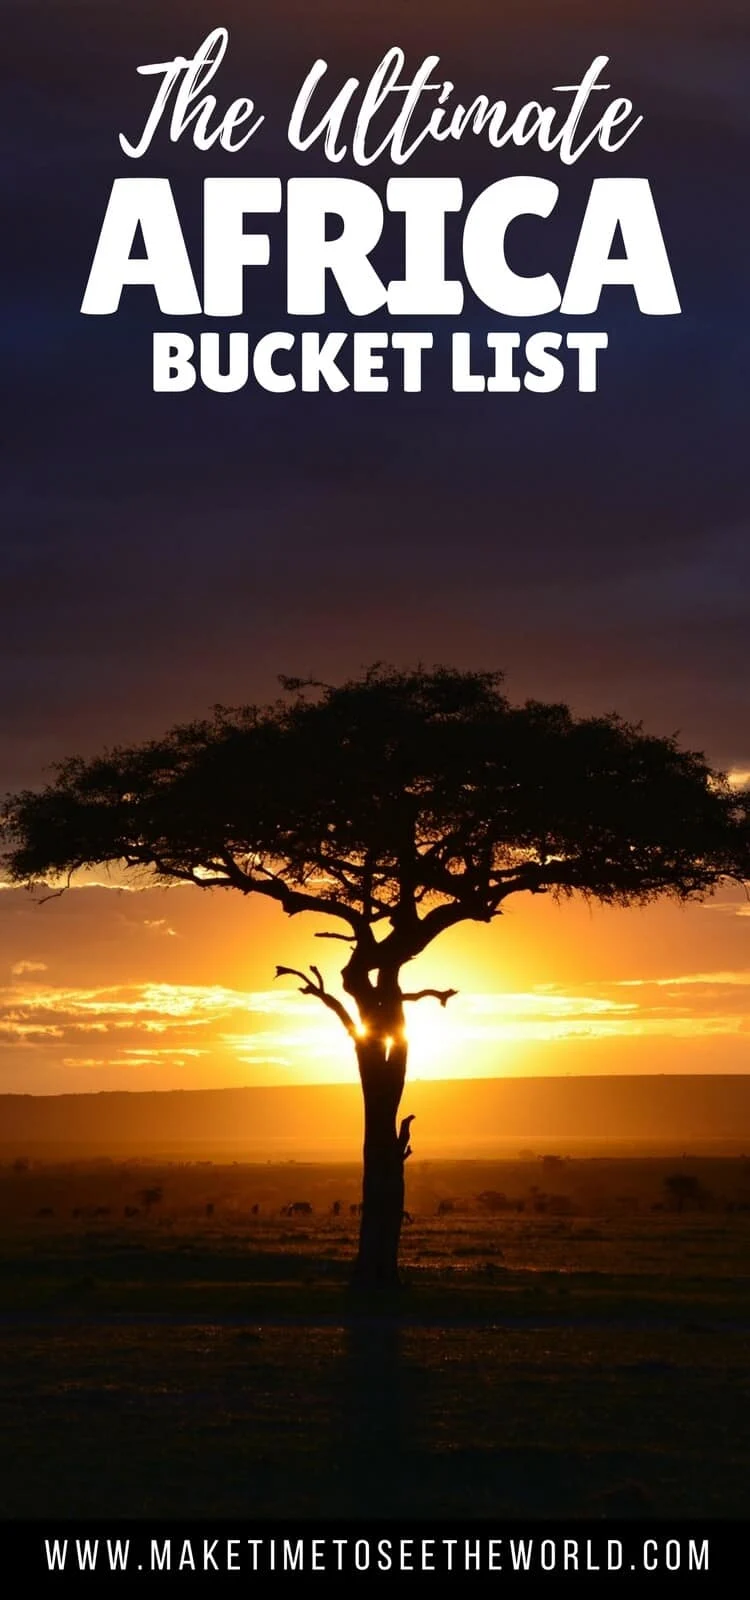 The Ultimate Africa Bucket List